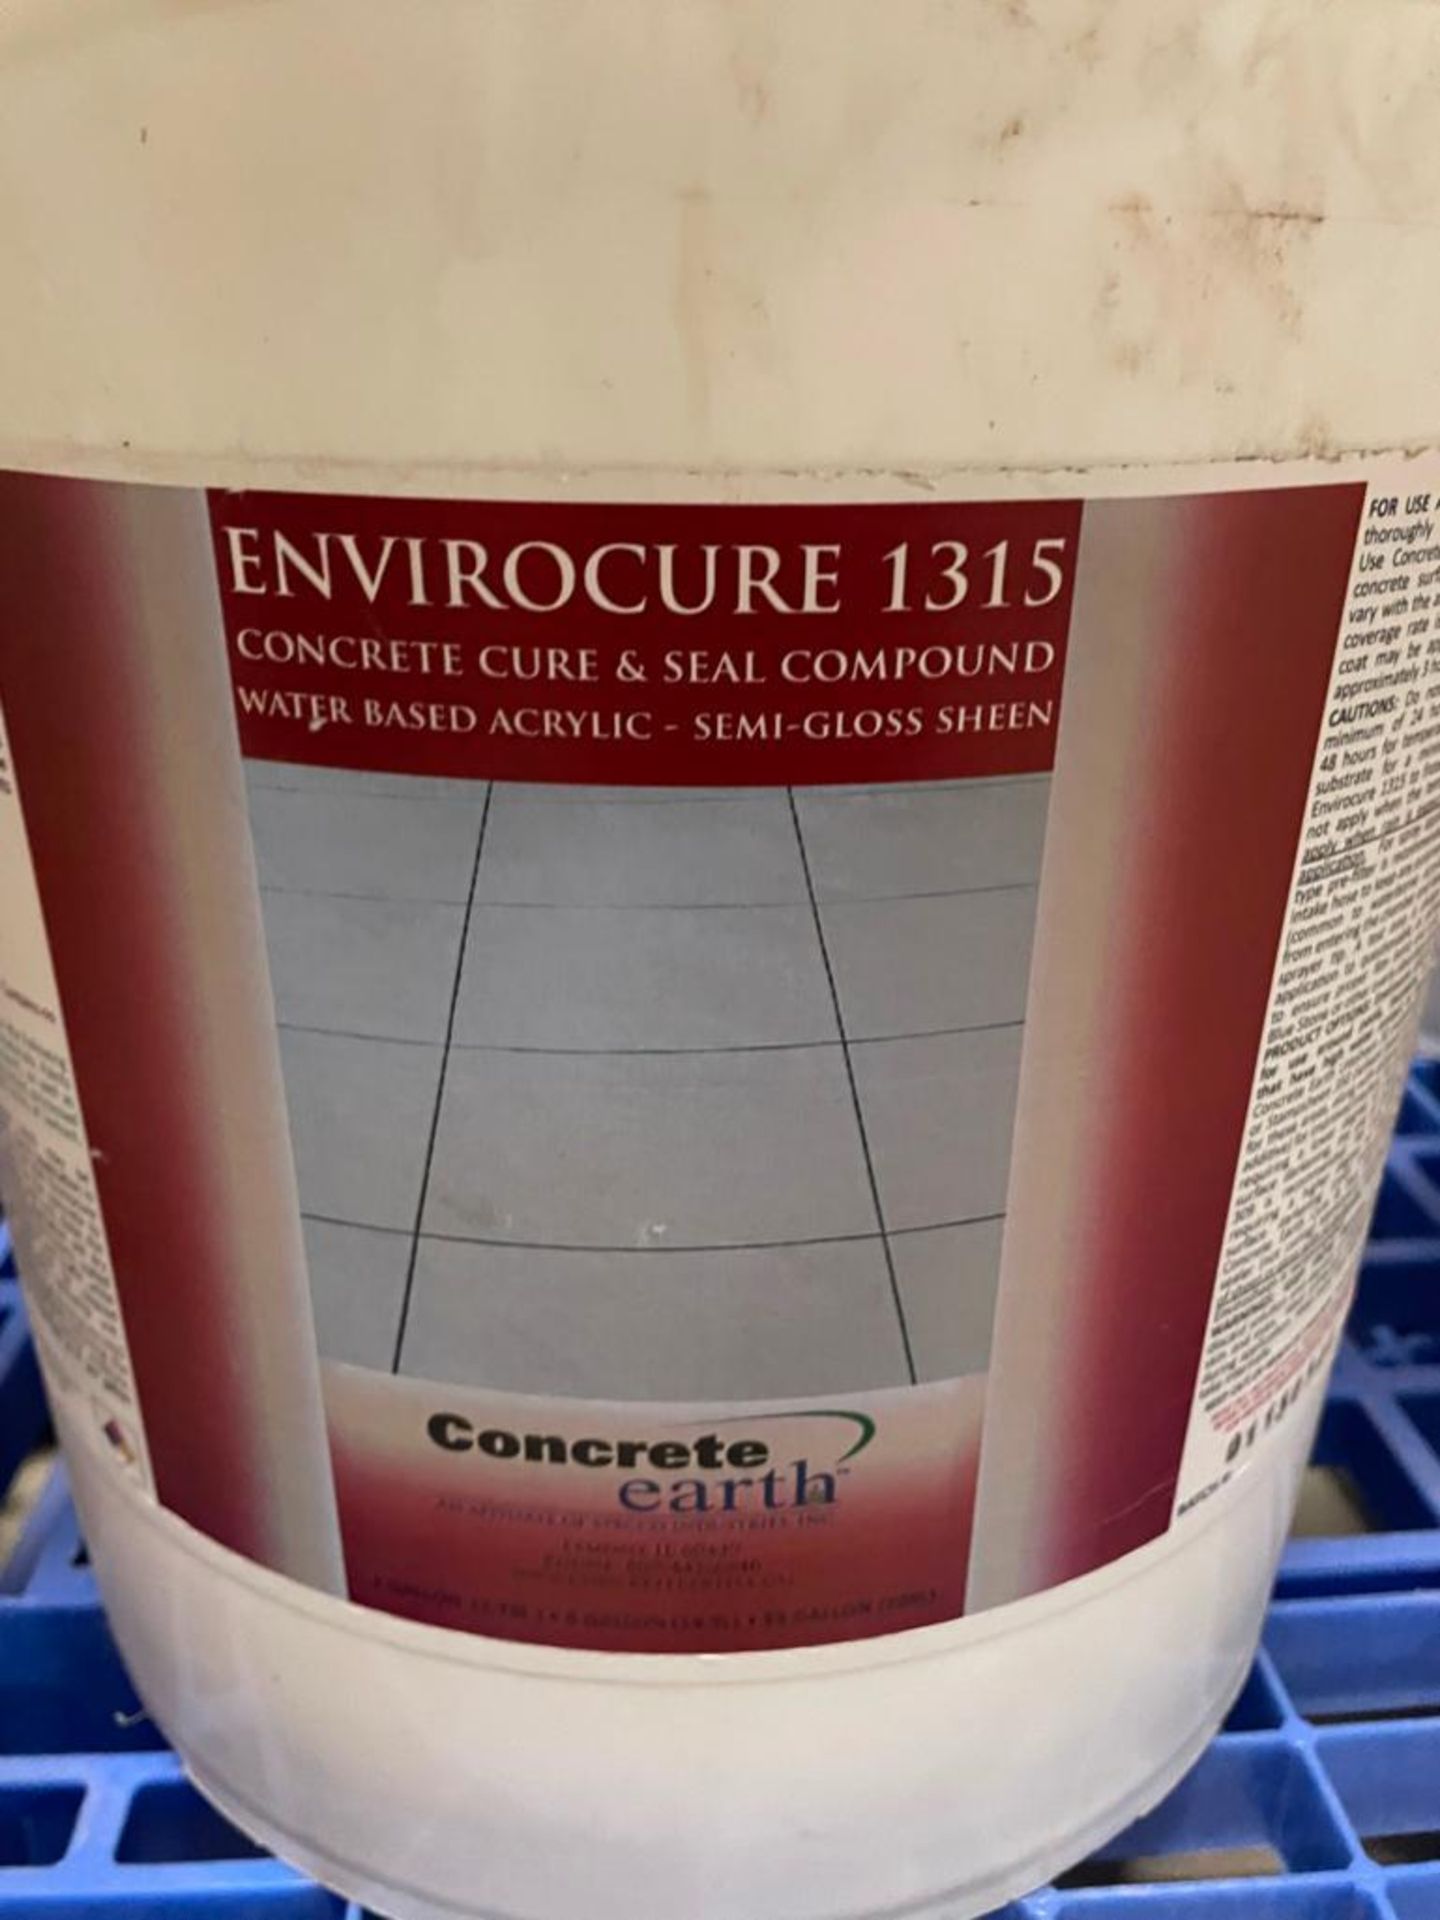 Pallet - (16) Buckets of Concrete Earth Envirocure 1315 Concrete Cure & Seal Compound, Water Based A - Image 2 of 2